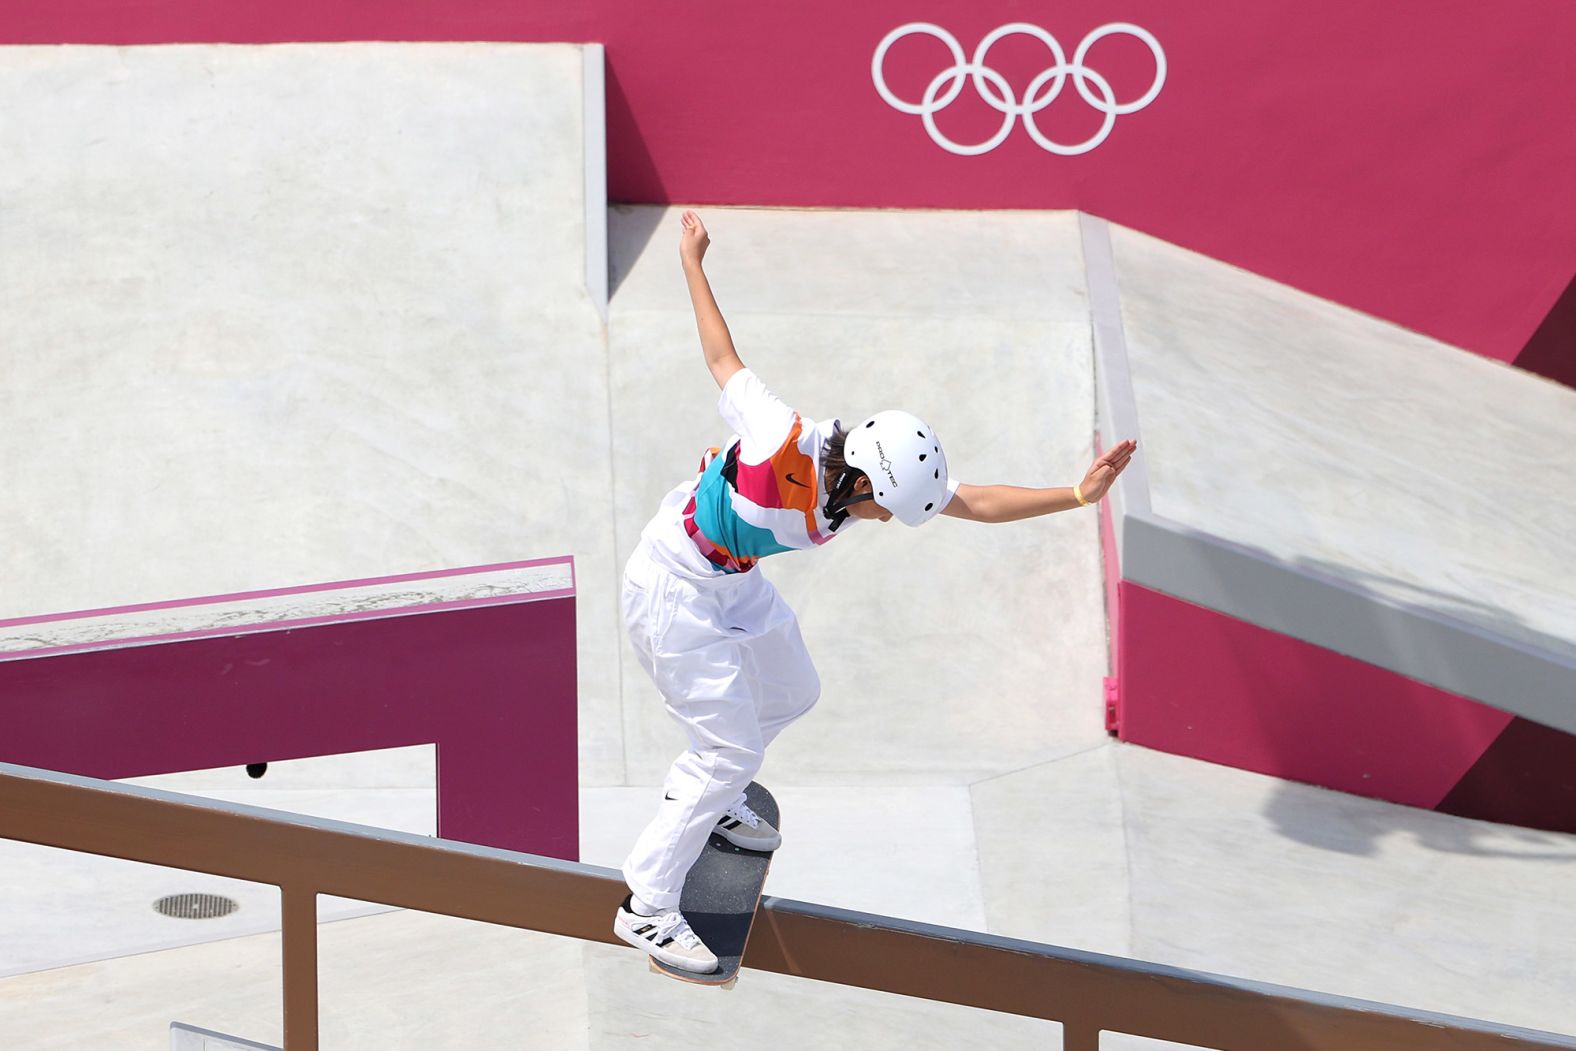 Japanese skateboarder Momiji Nishiya grinds a rail during the women's street competition on July 26. The 13-year-old <a href="index.php?page=&url=https%3A%2F%2Fwww.cnn.com%2Fworld%2Flive-news%2Ftokyo-2020-olympics-07-26-21-spt%2Fh_6946ceefadd9040136faf87fdbcd8852" target="_blank">won gold in the new event,</a> a day after fellow Japanese skateboarder Yuto Horigome won gold on the men's side. She is one of the youngest gold-medal winners in Olympic history. She is just months older than the current female record-holder, American diver Marjorie Gestring, who was 13 years and 267 days old when she won gold at the Berlin Games in 1936.